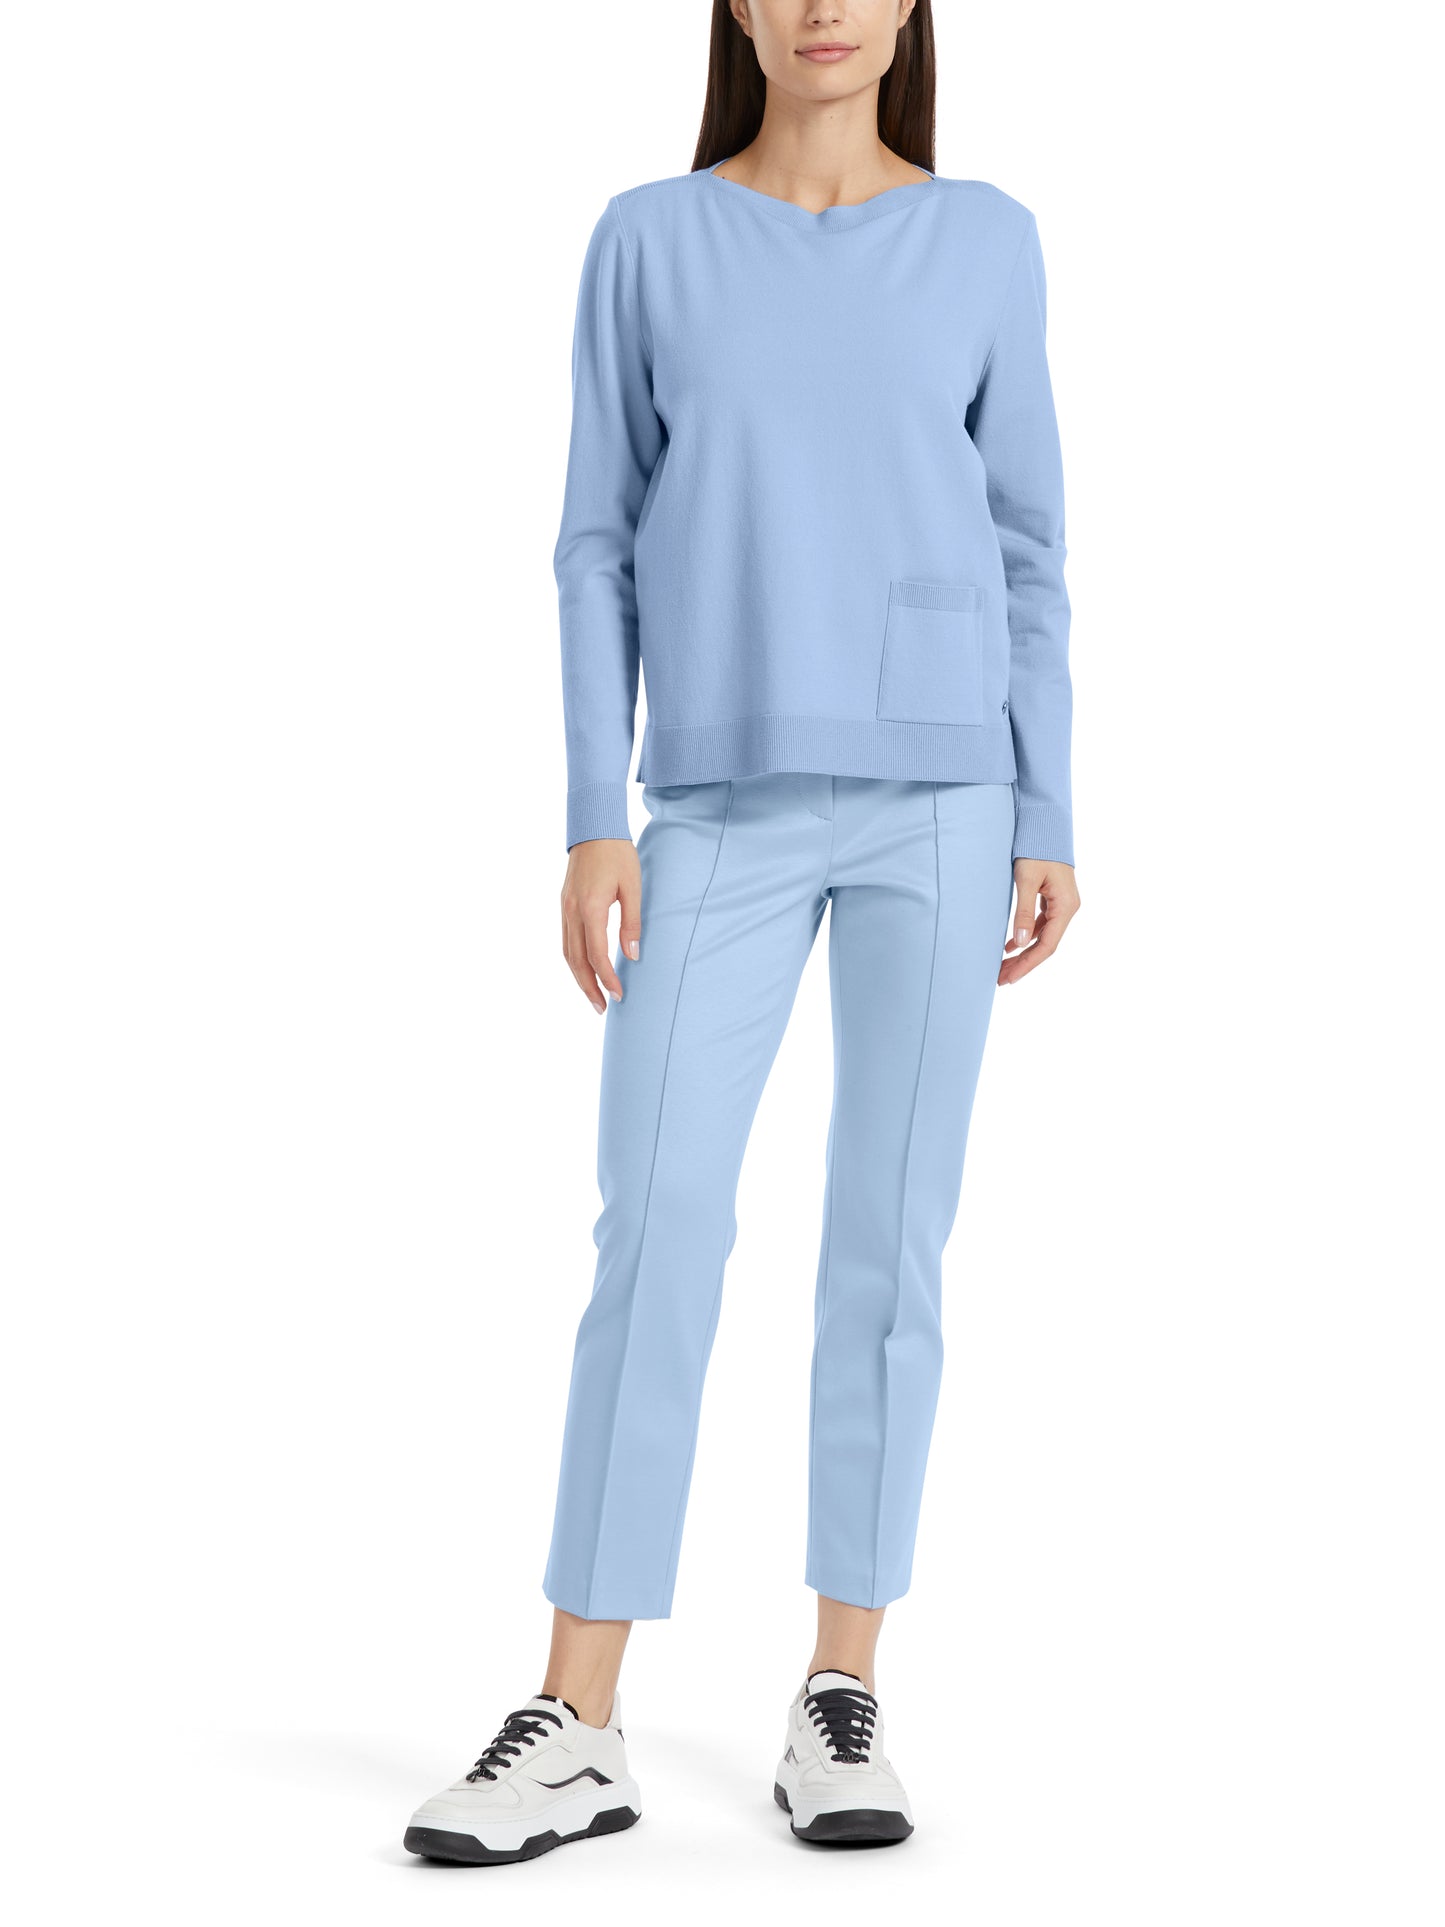 Marc Cain Additions Pale Blue Sweater